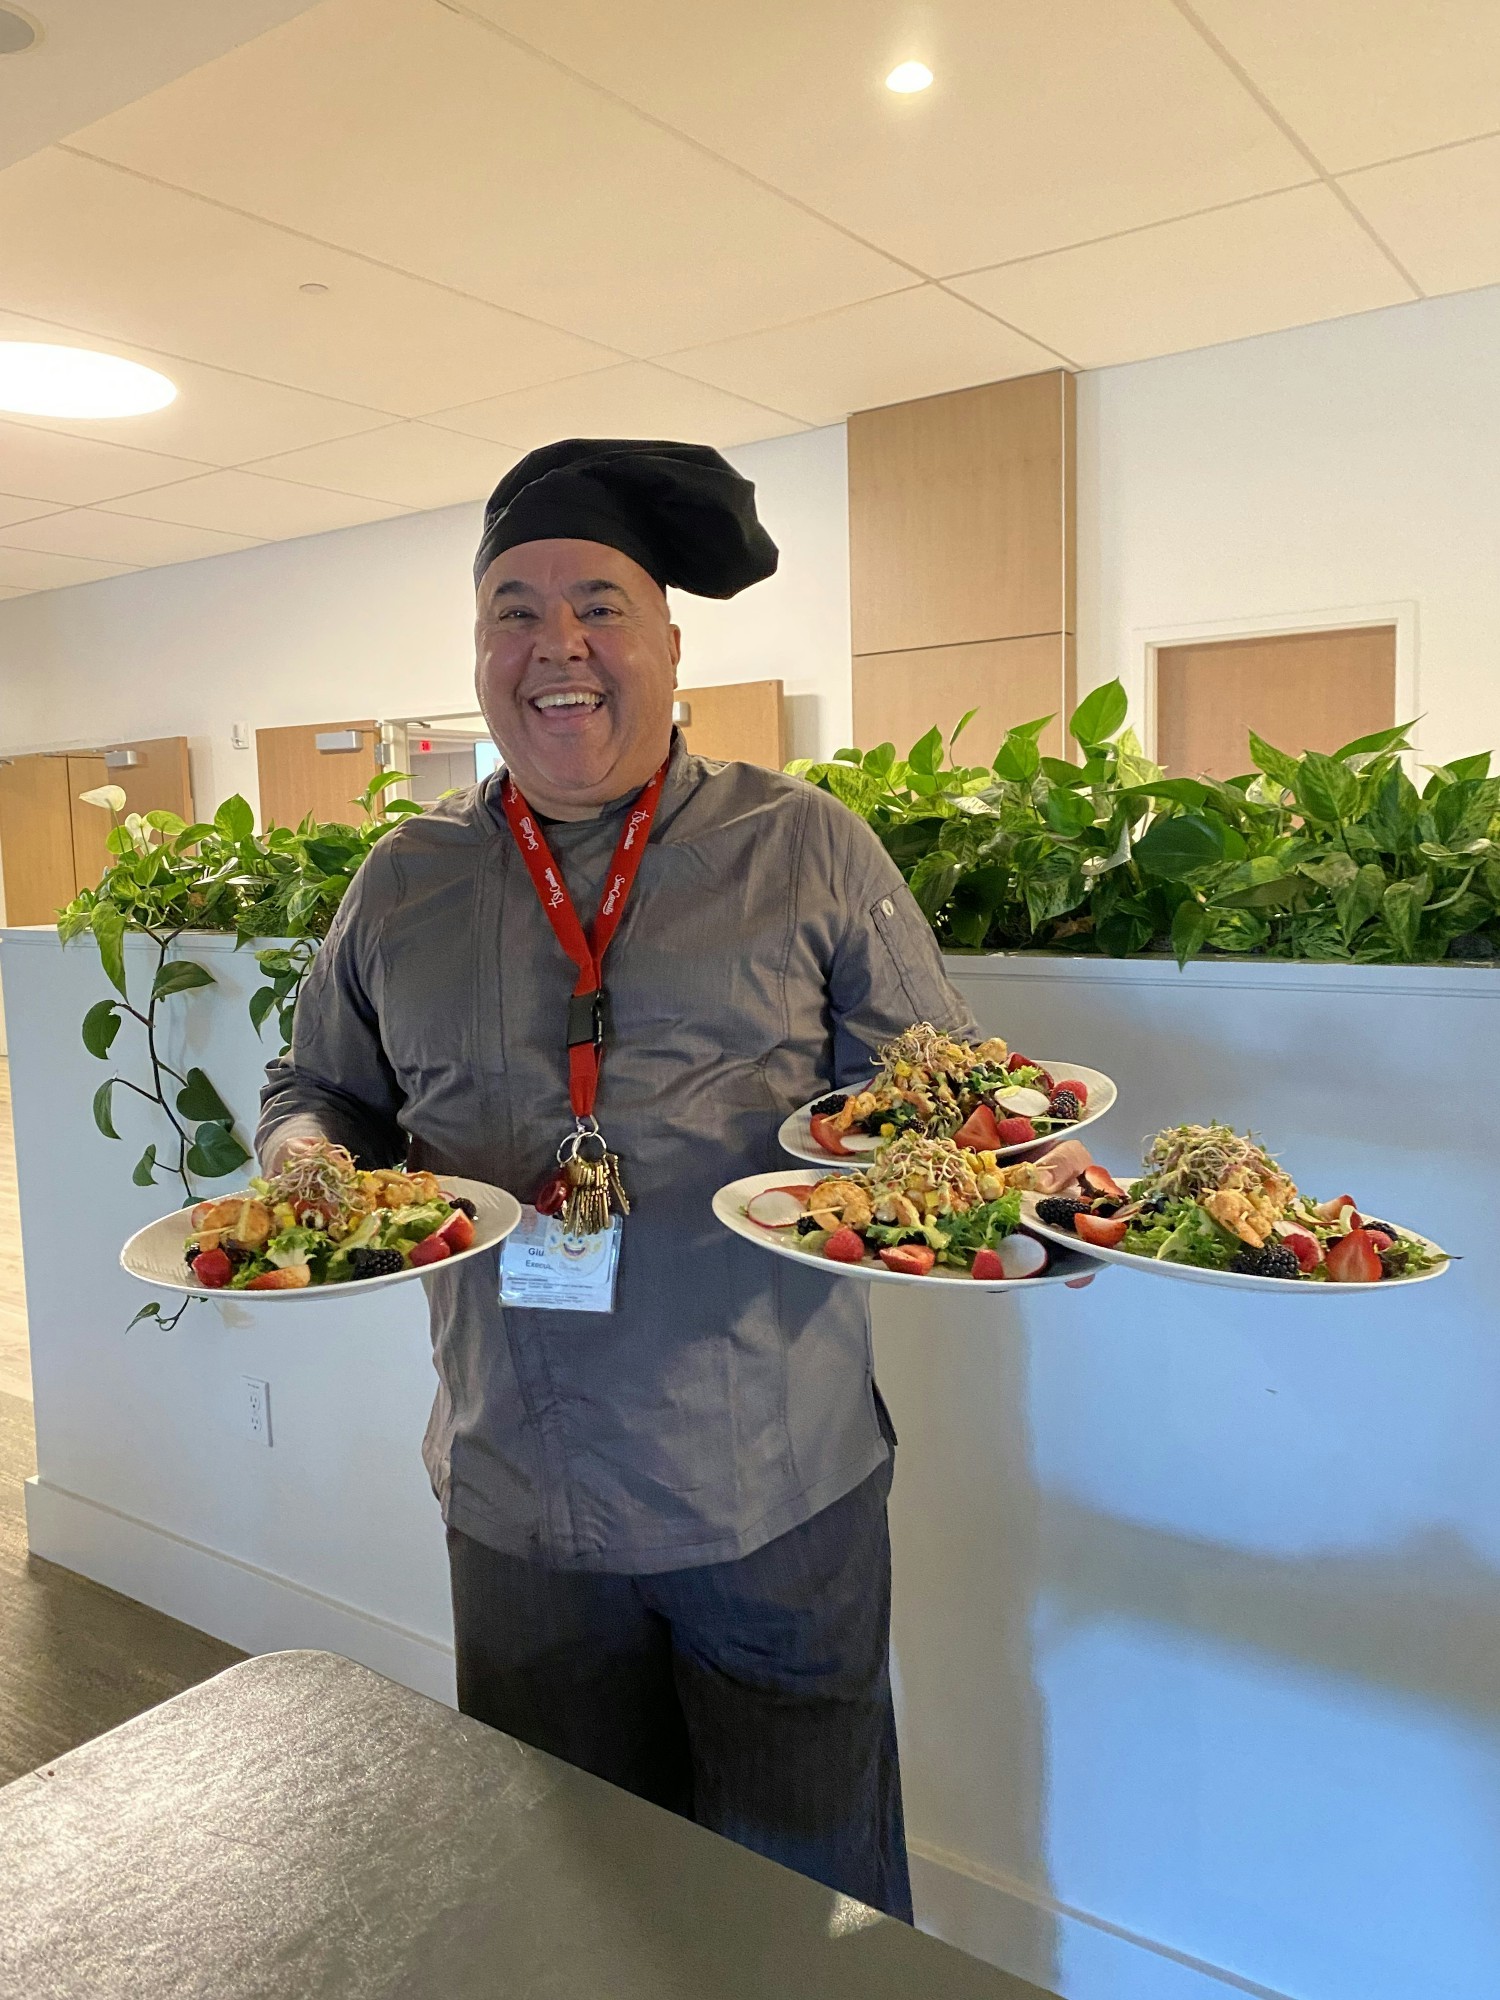 Our executive chef preparing healthy food options